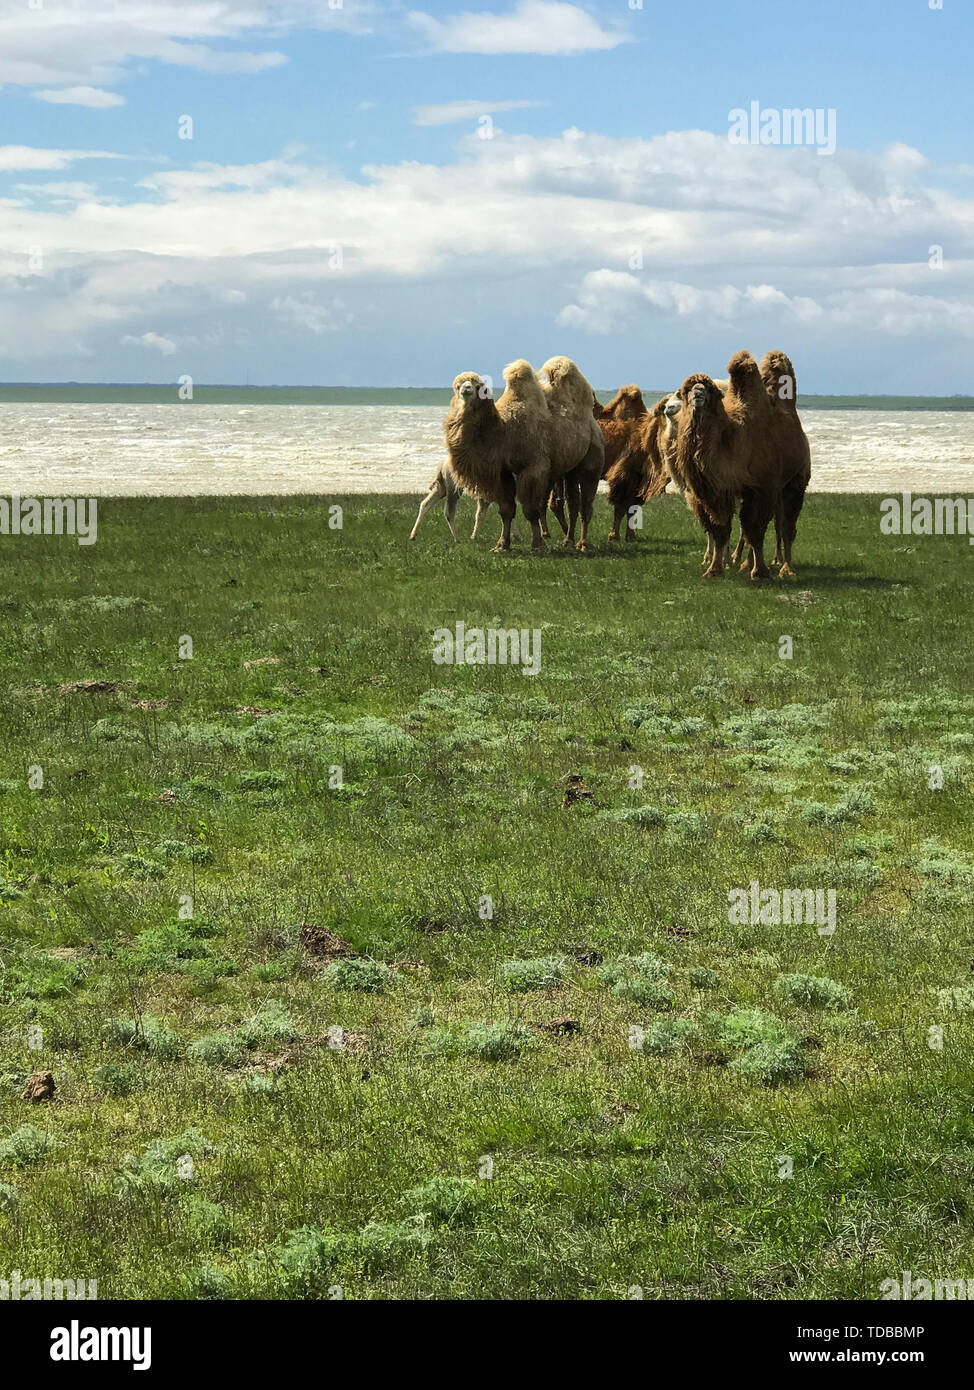 herd of camels in a field against the sky Stock Photo